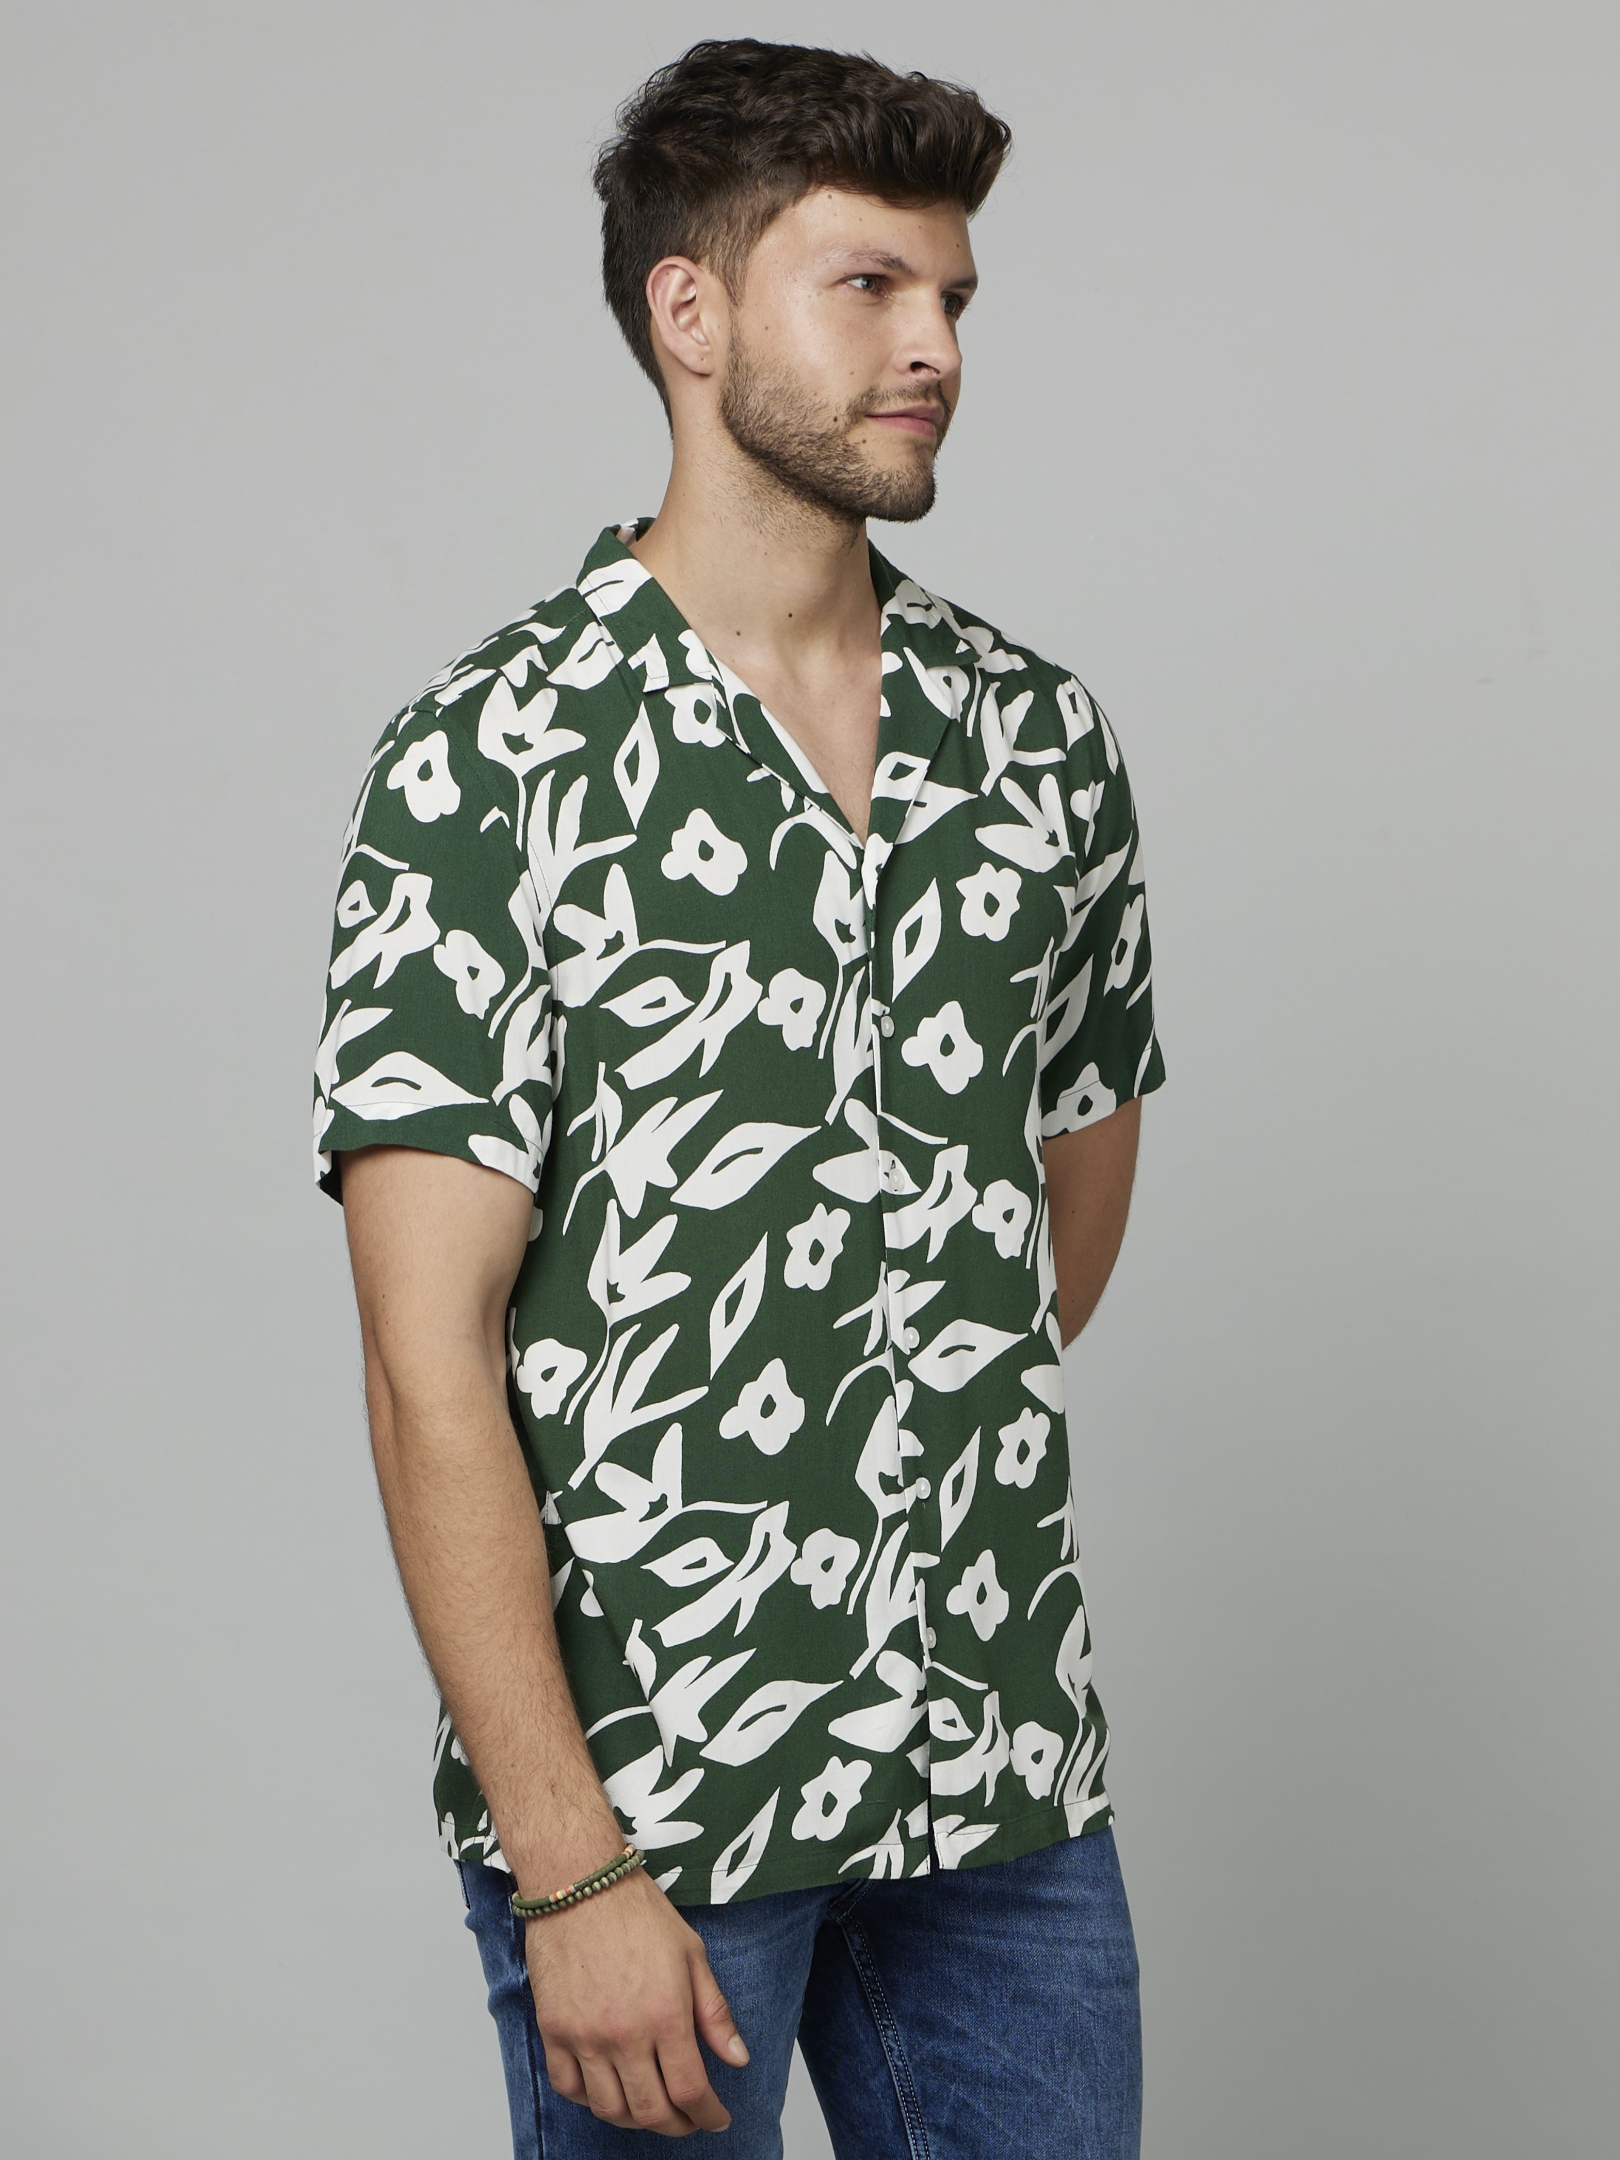 Men's Green Floral Casual Shirts